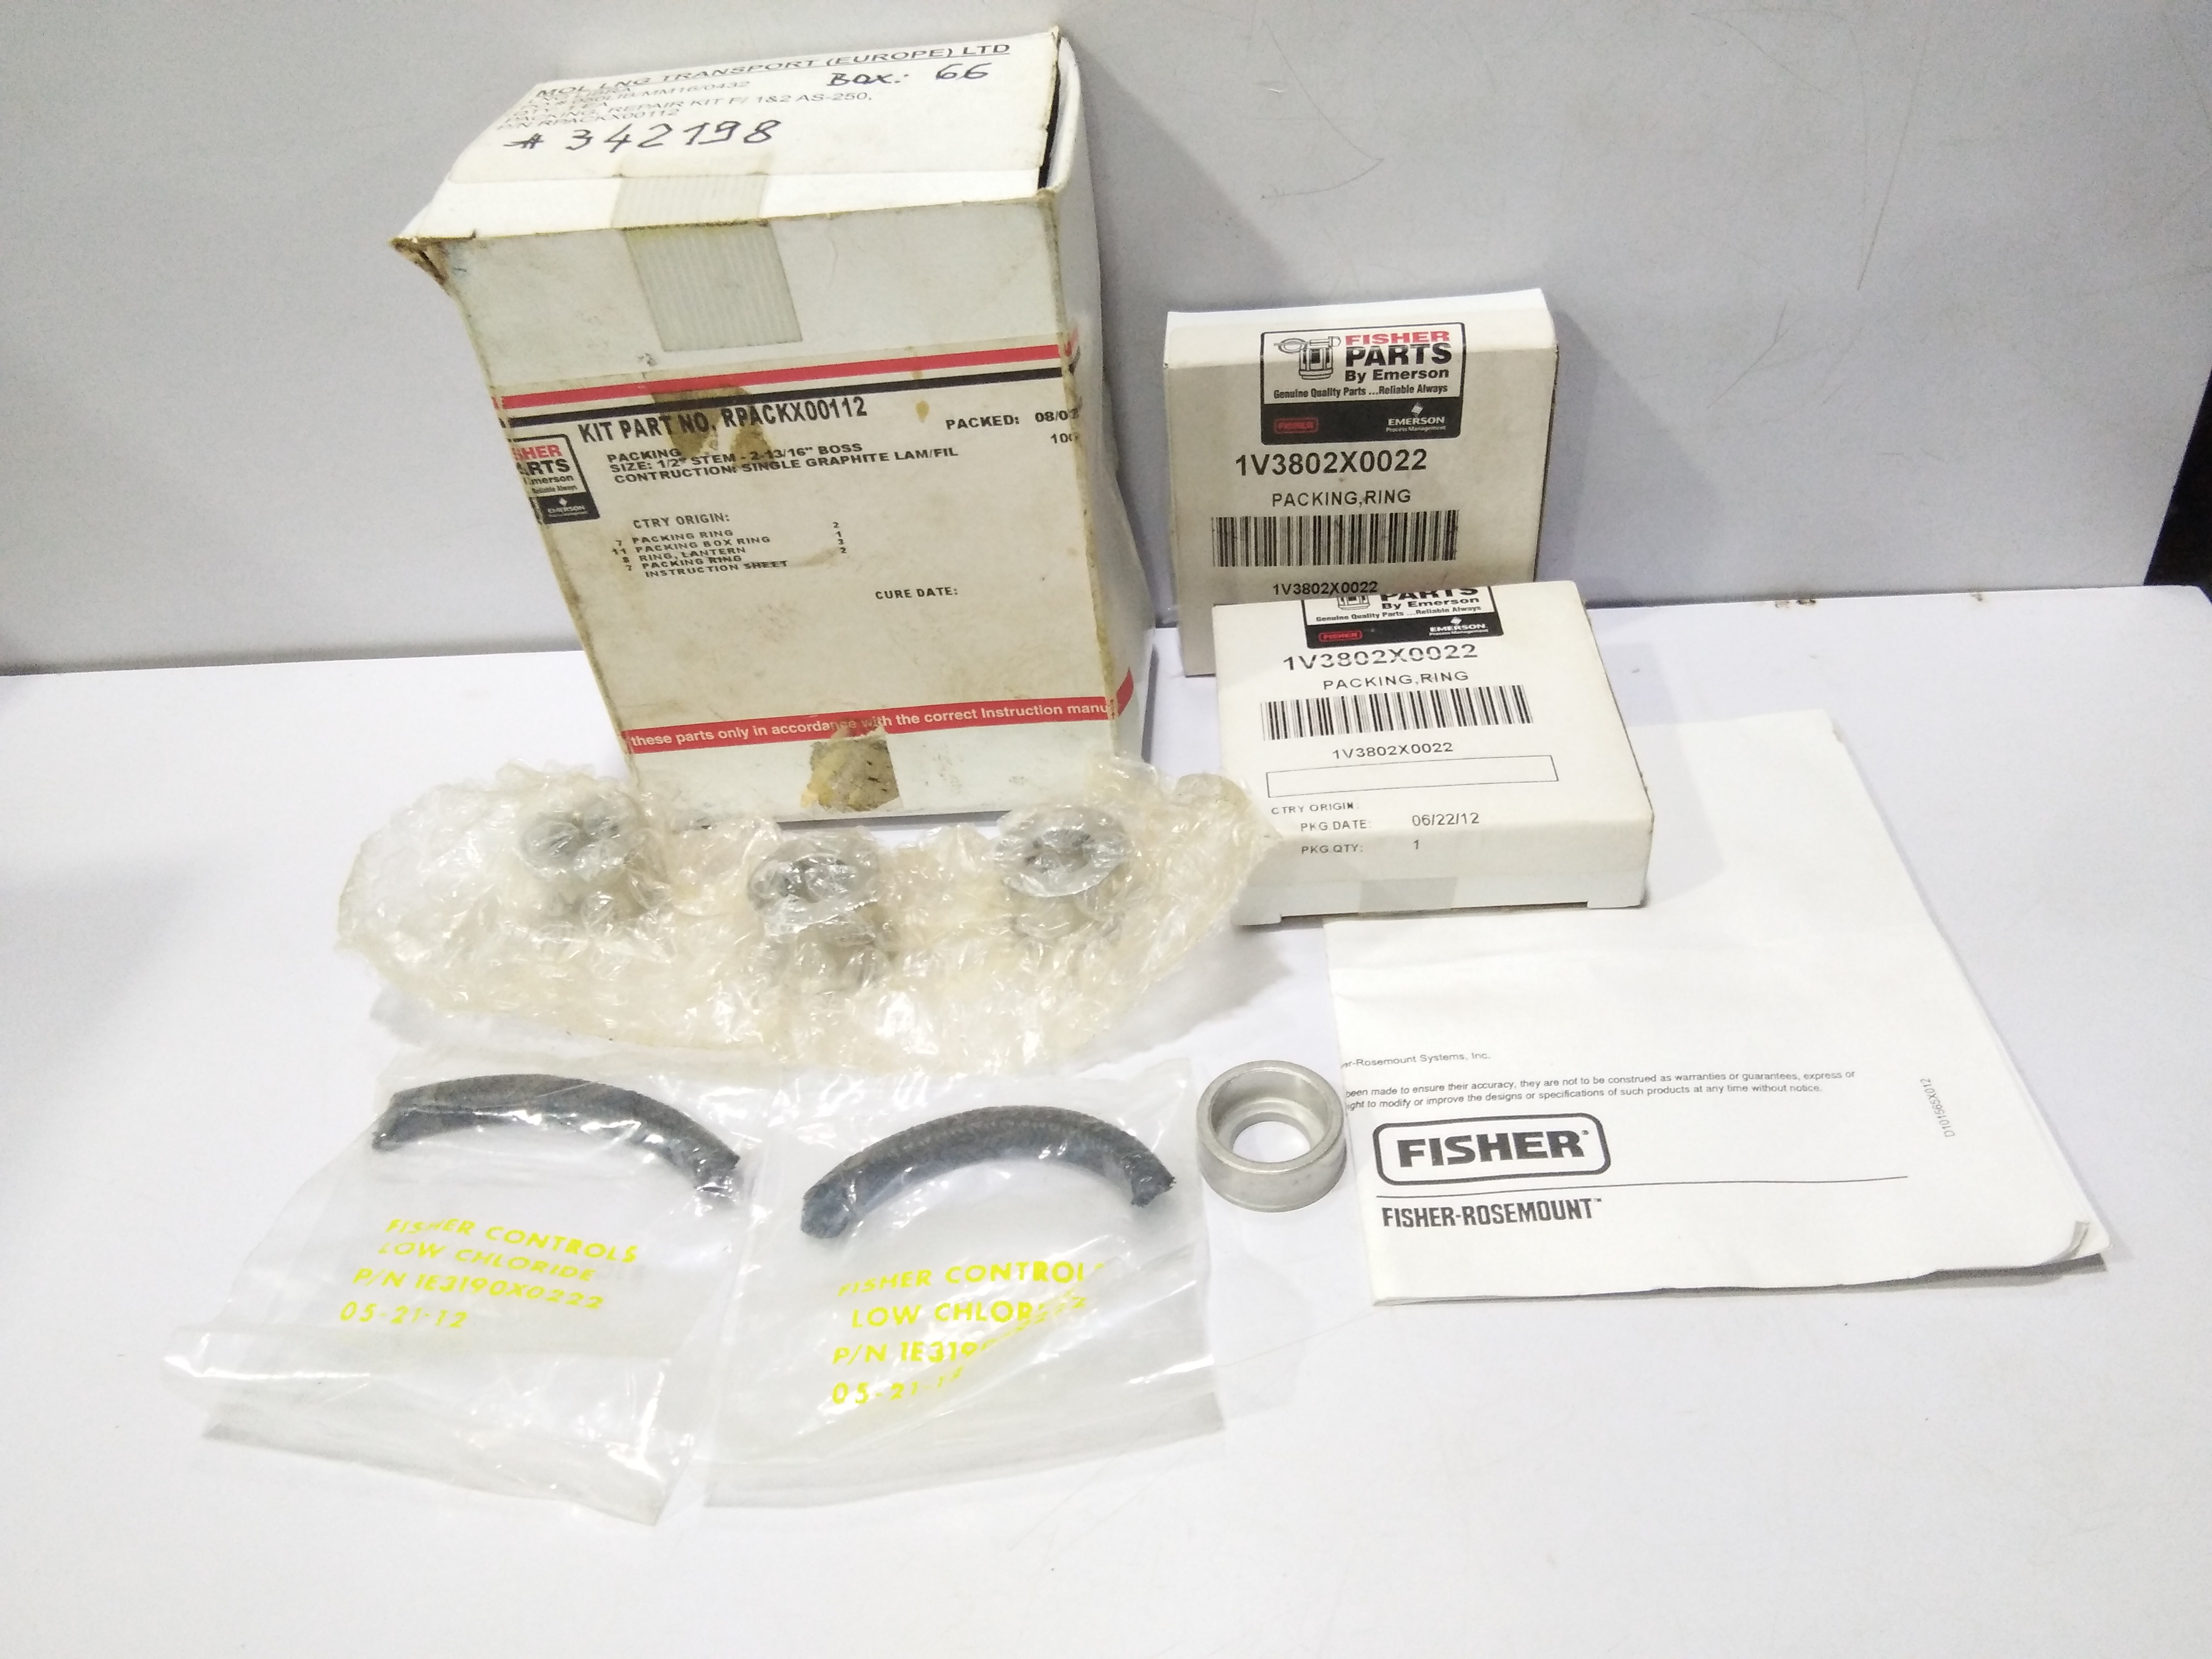 FISHER KIT PART NO RPACKX00112